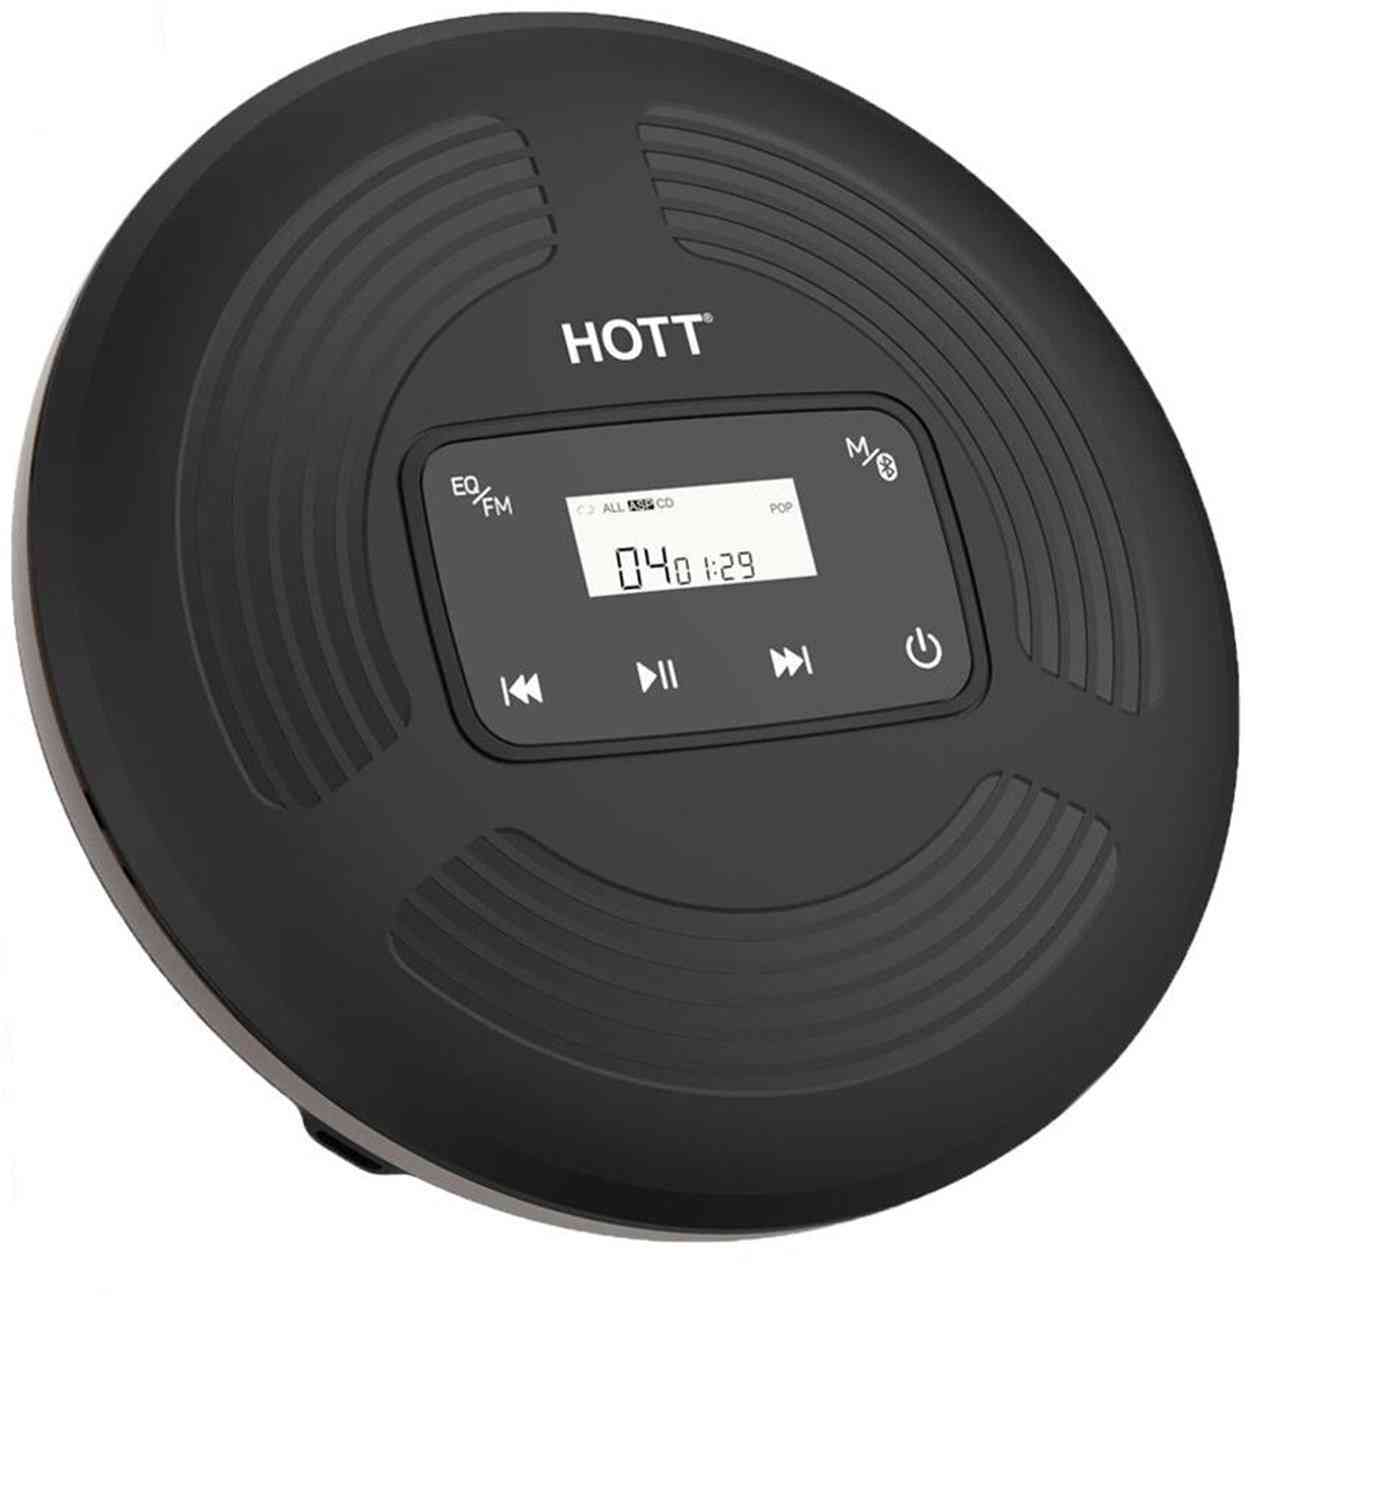 Rechargeable Bluetooth Portable Cd Player With Fm Transmitter, Anti Shock Protection Touch Button